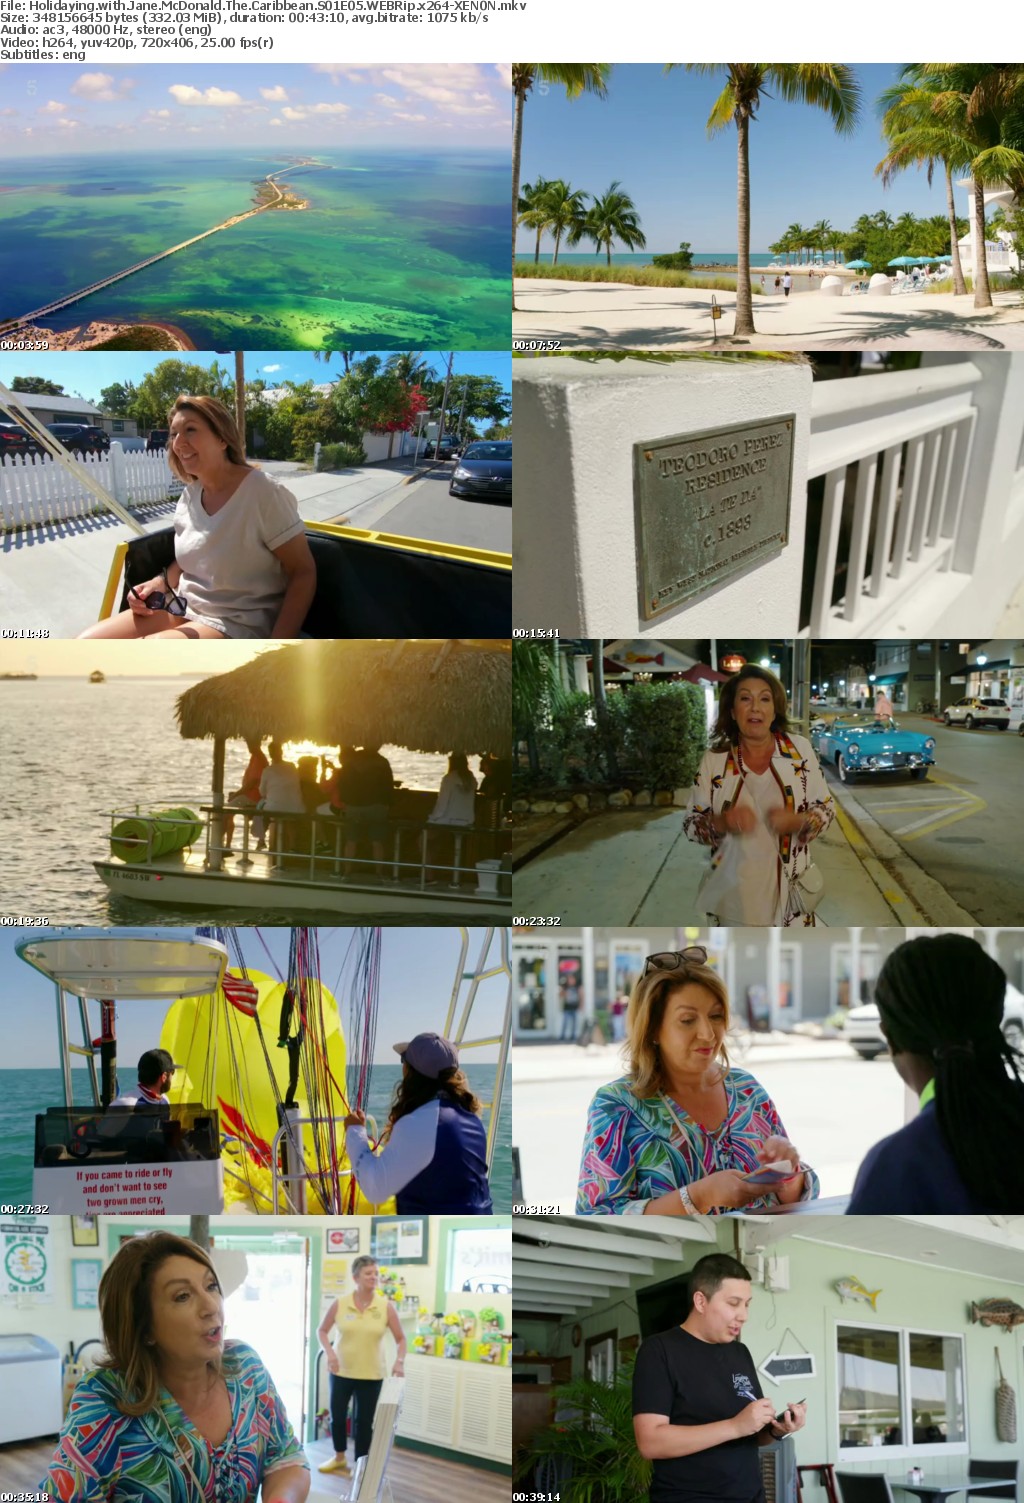 Holidaying with Jane McDonald The Caribbean S01E05 WEBRip x264-XEN0N